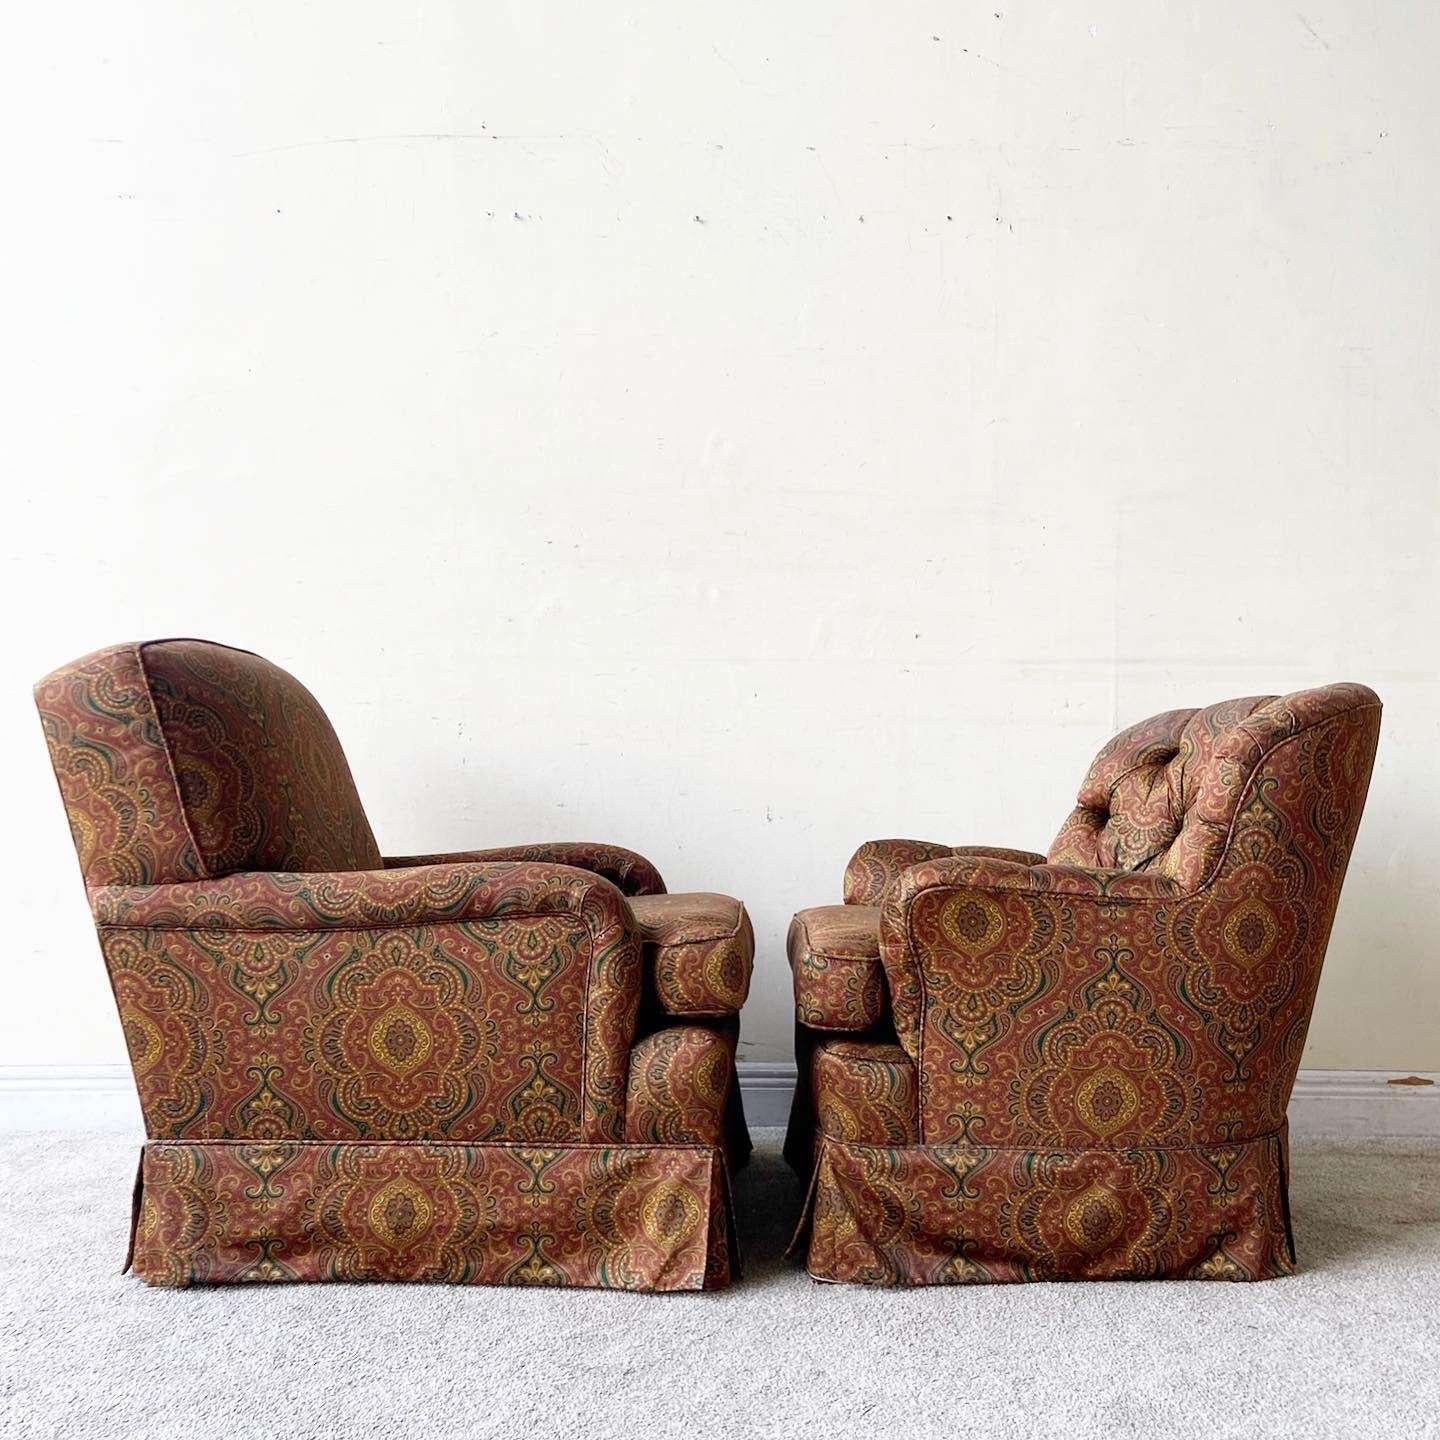 American Mid Century Modern Him and Hers Lounge Chairs For Sale